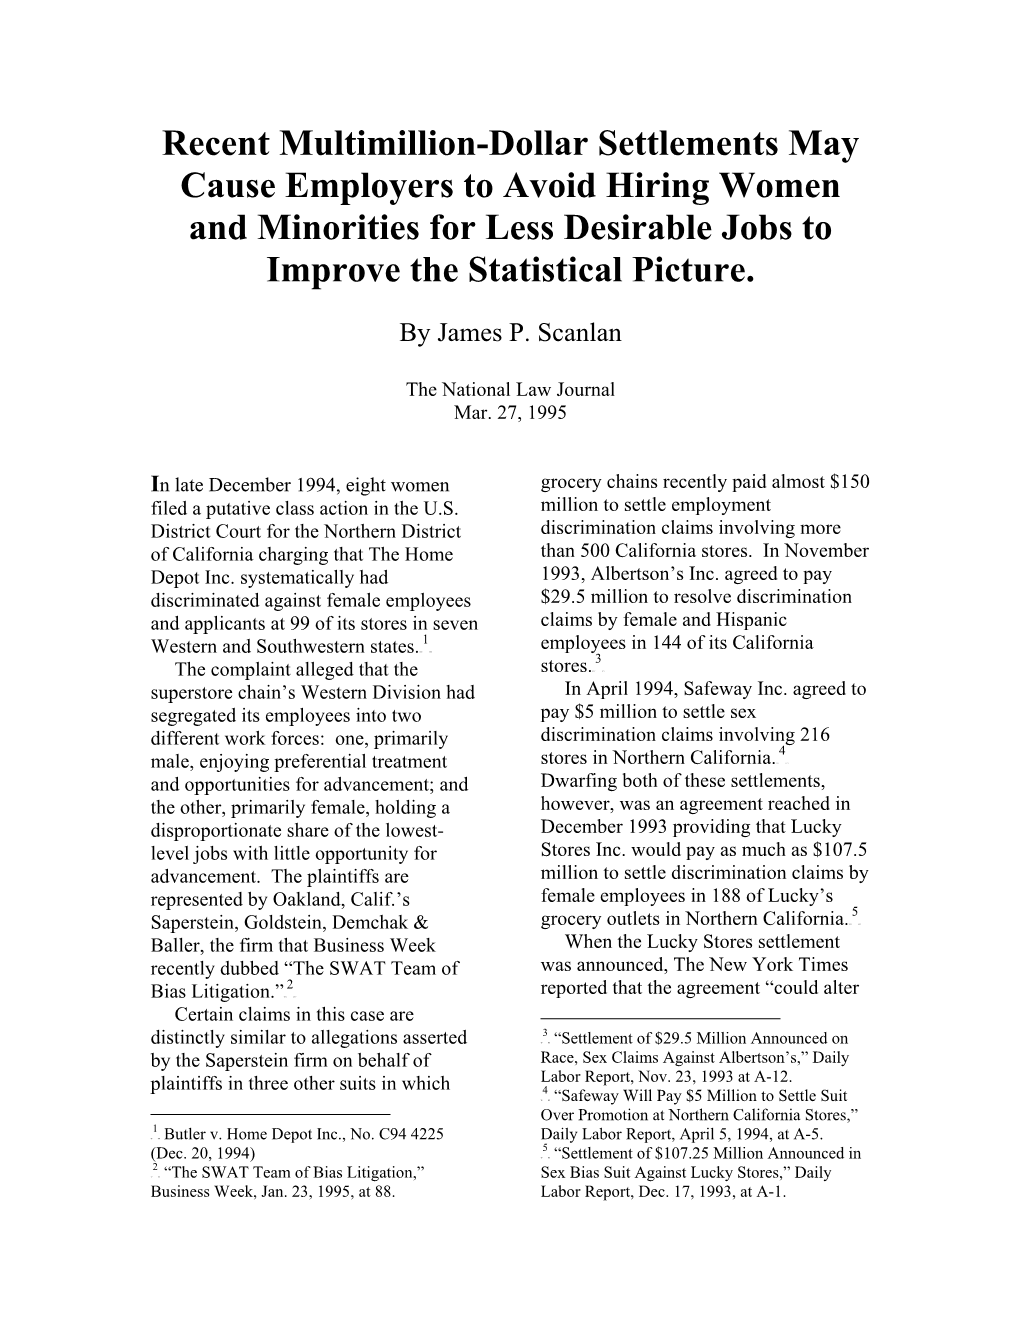 Multimillion-Dollar Settlements May Cause Employers to Avoid Hiring Women and Minorities for Less Desirable Jobs to Improve the Statistical Picture